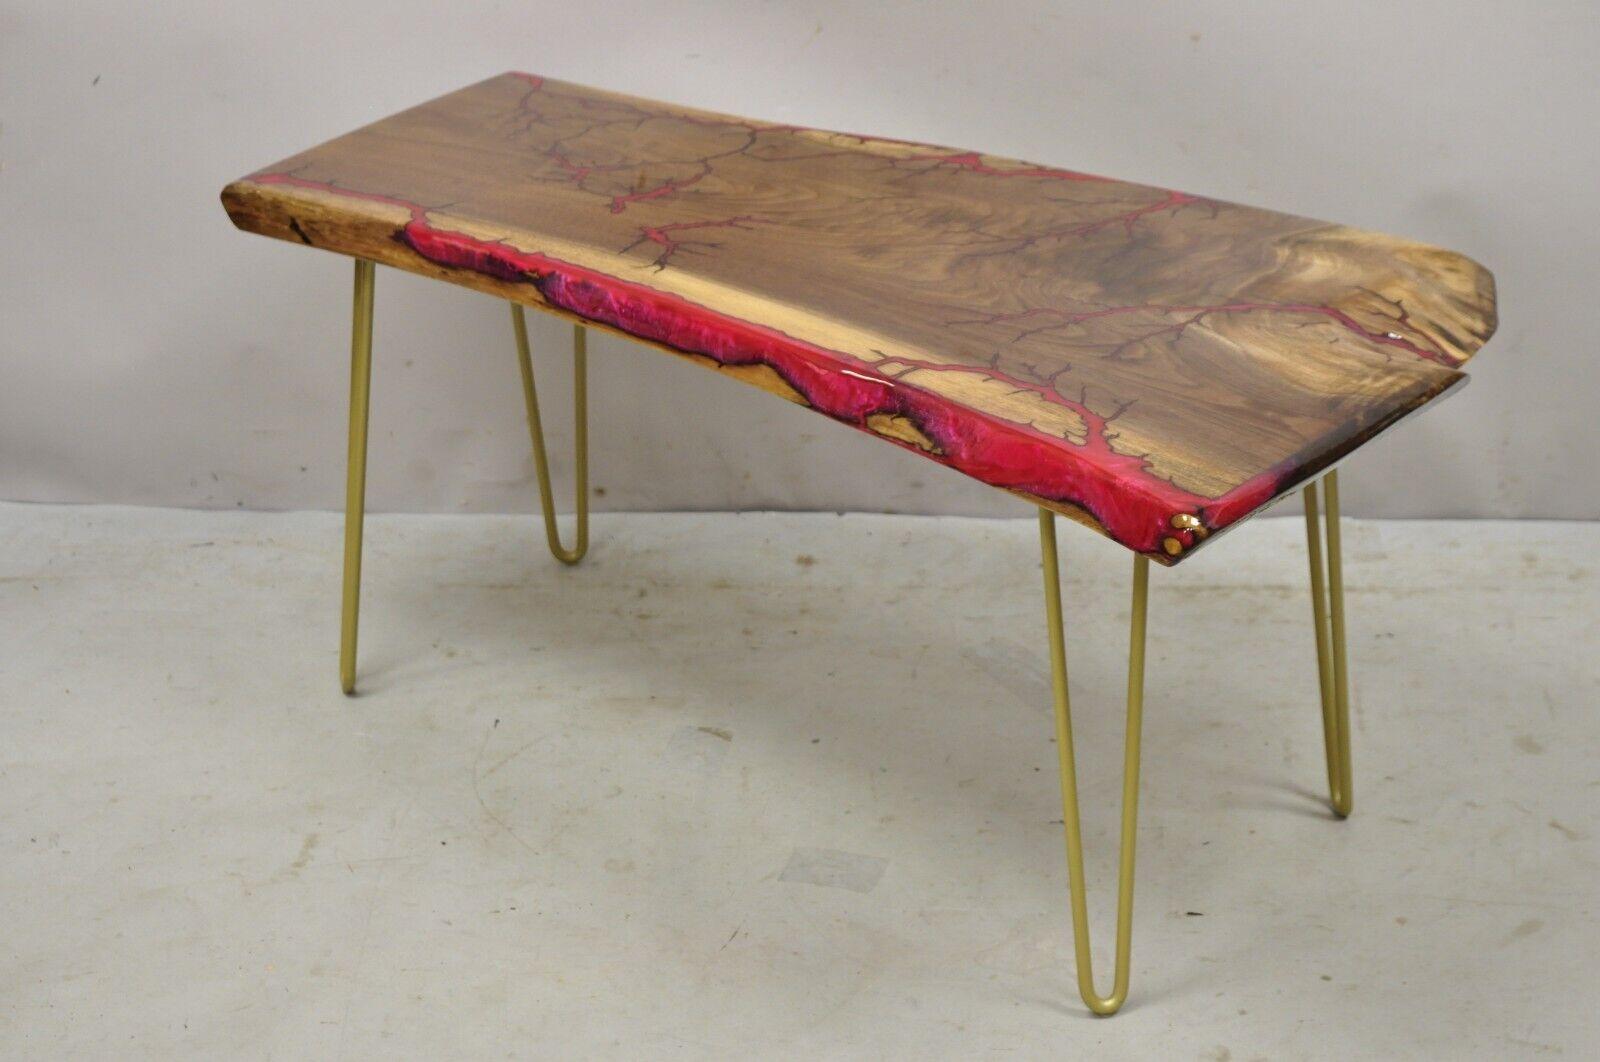 Live edge black walnut surfboard coffee table red resin lacquer hairpin legs. Item features gold metal hairpin legs, thick black walnut wood slab, red resin accents, lacquered finish, very nice item, great style and form. circa 21st century.